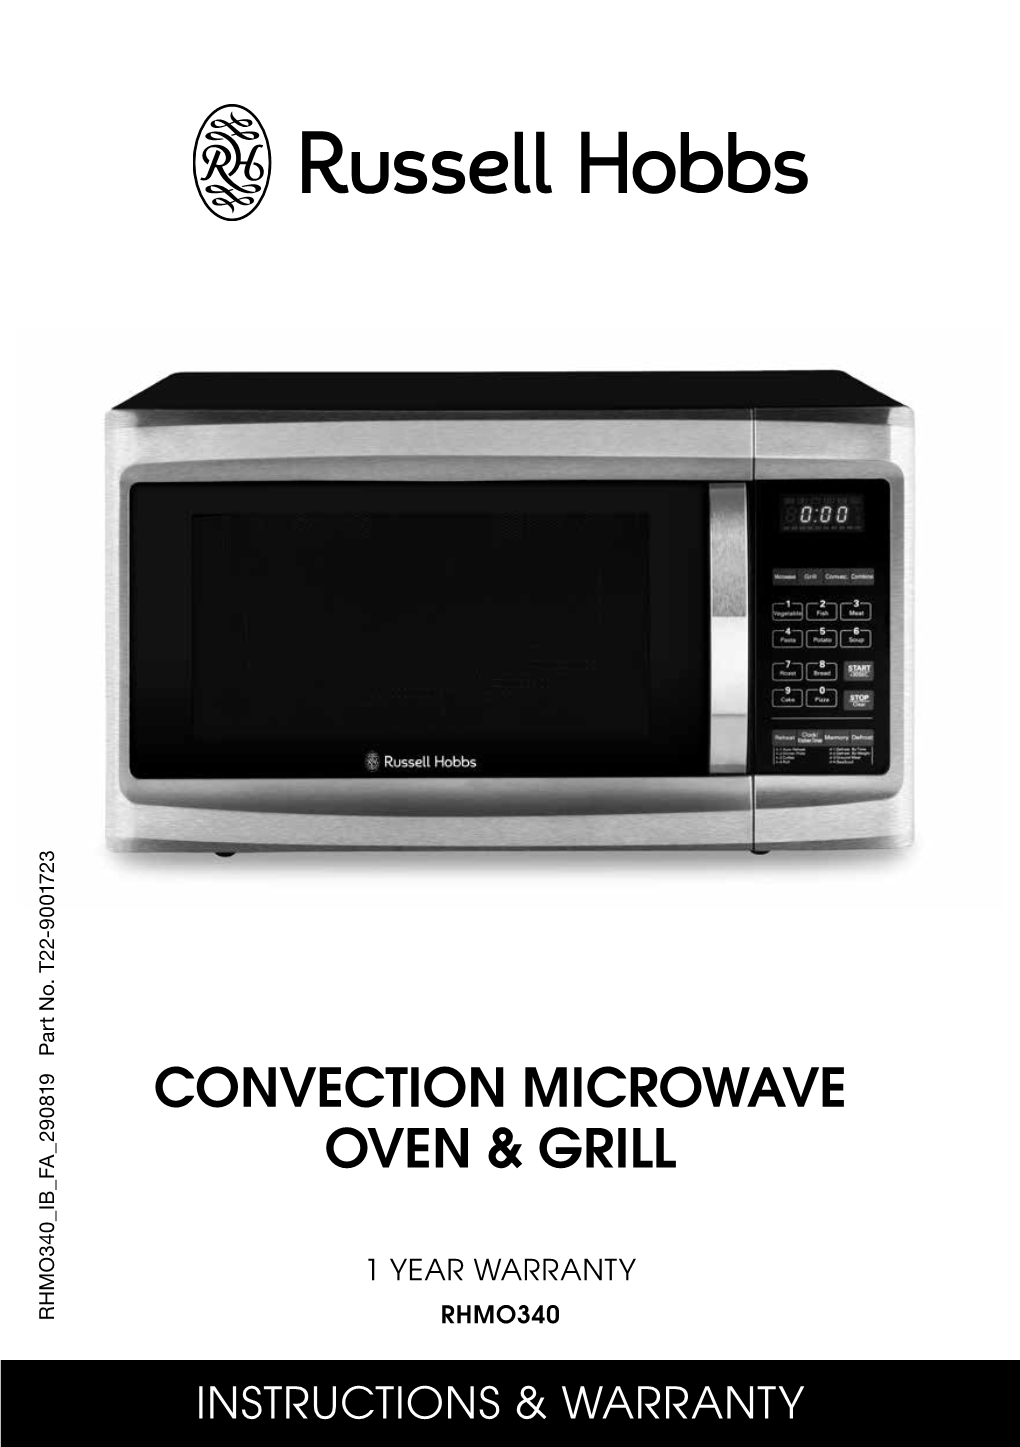 Convection Microwave Oven & Grill